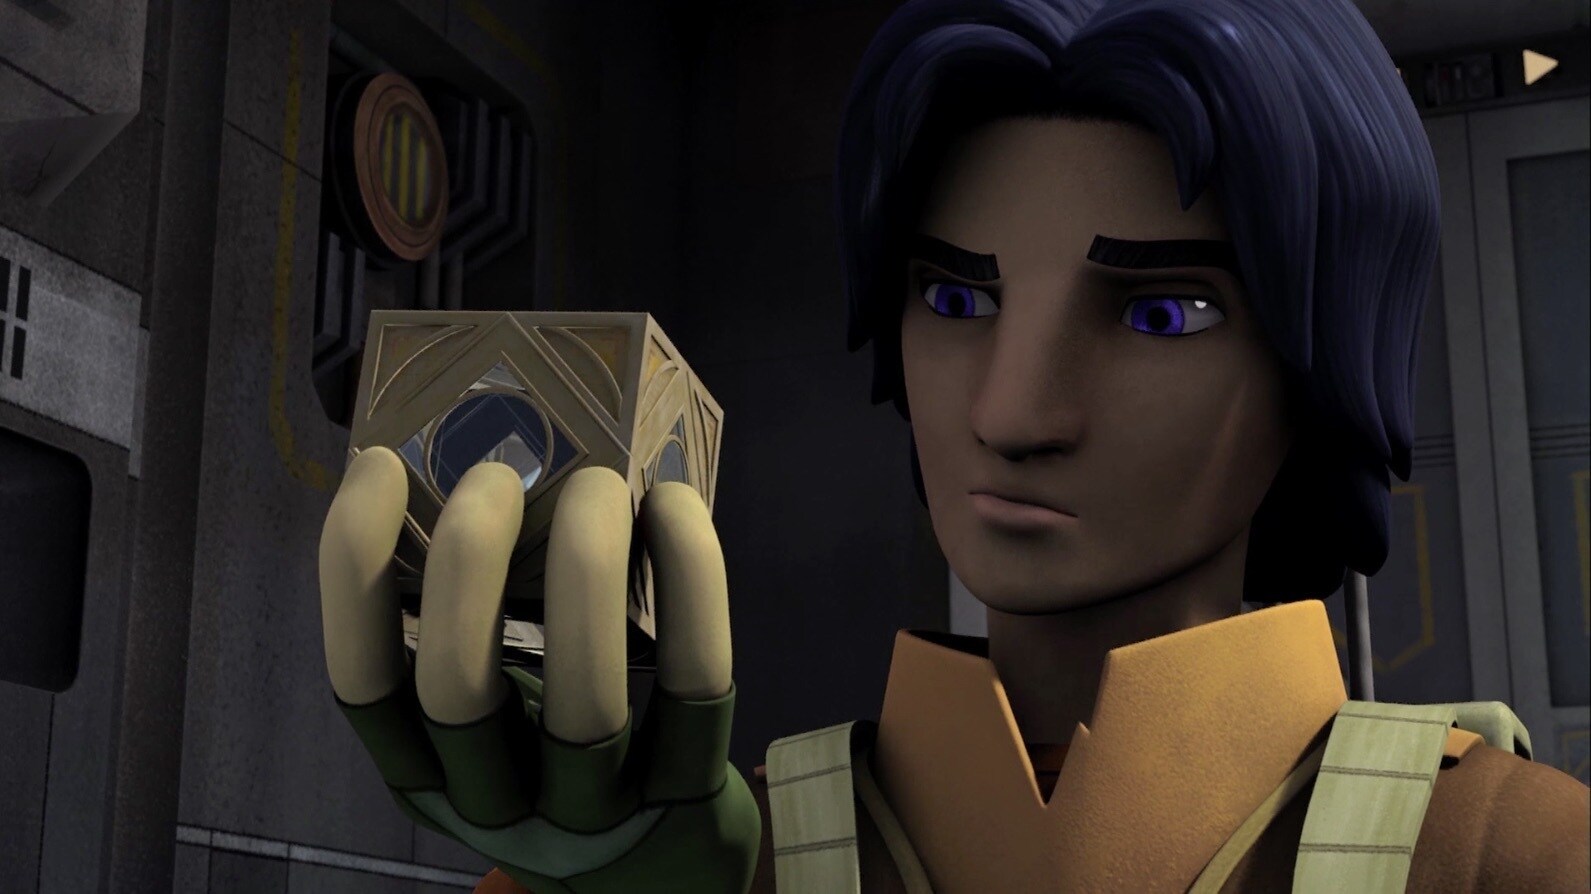 Kanan became a member of an anti-Imperial cell operating on the Outer Rim world of Lothal. His cr...